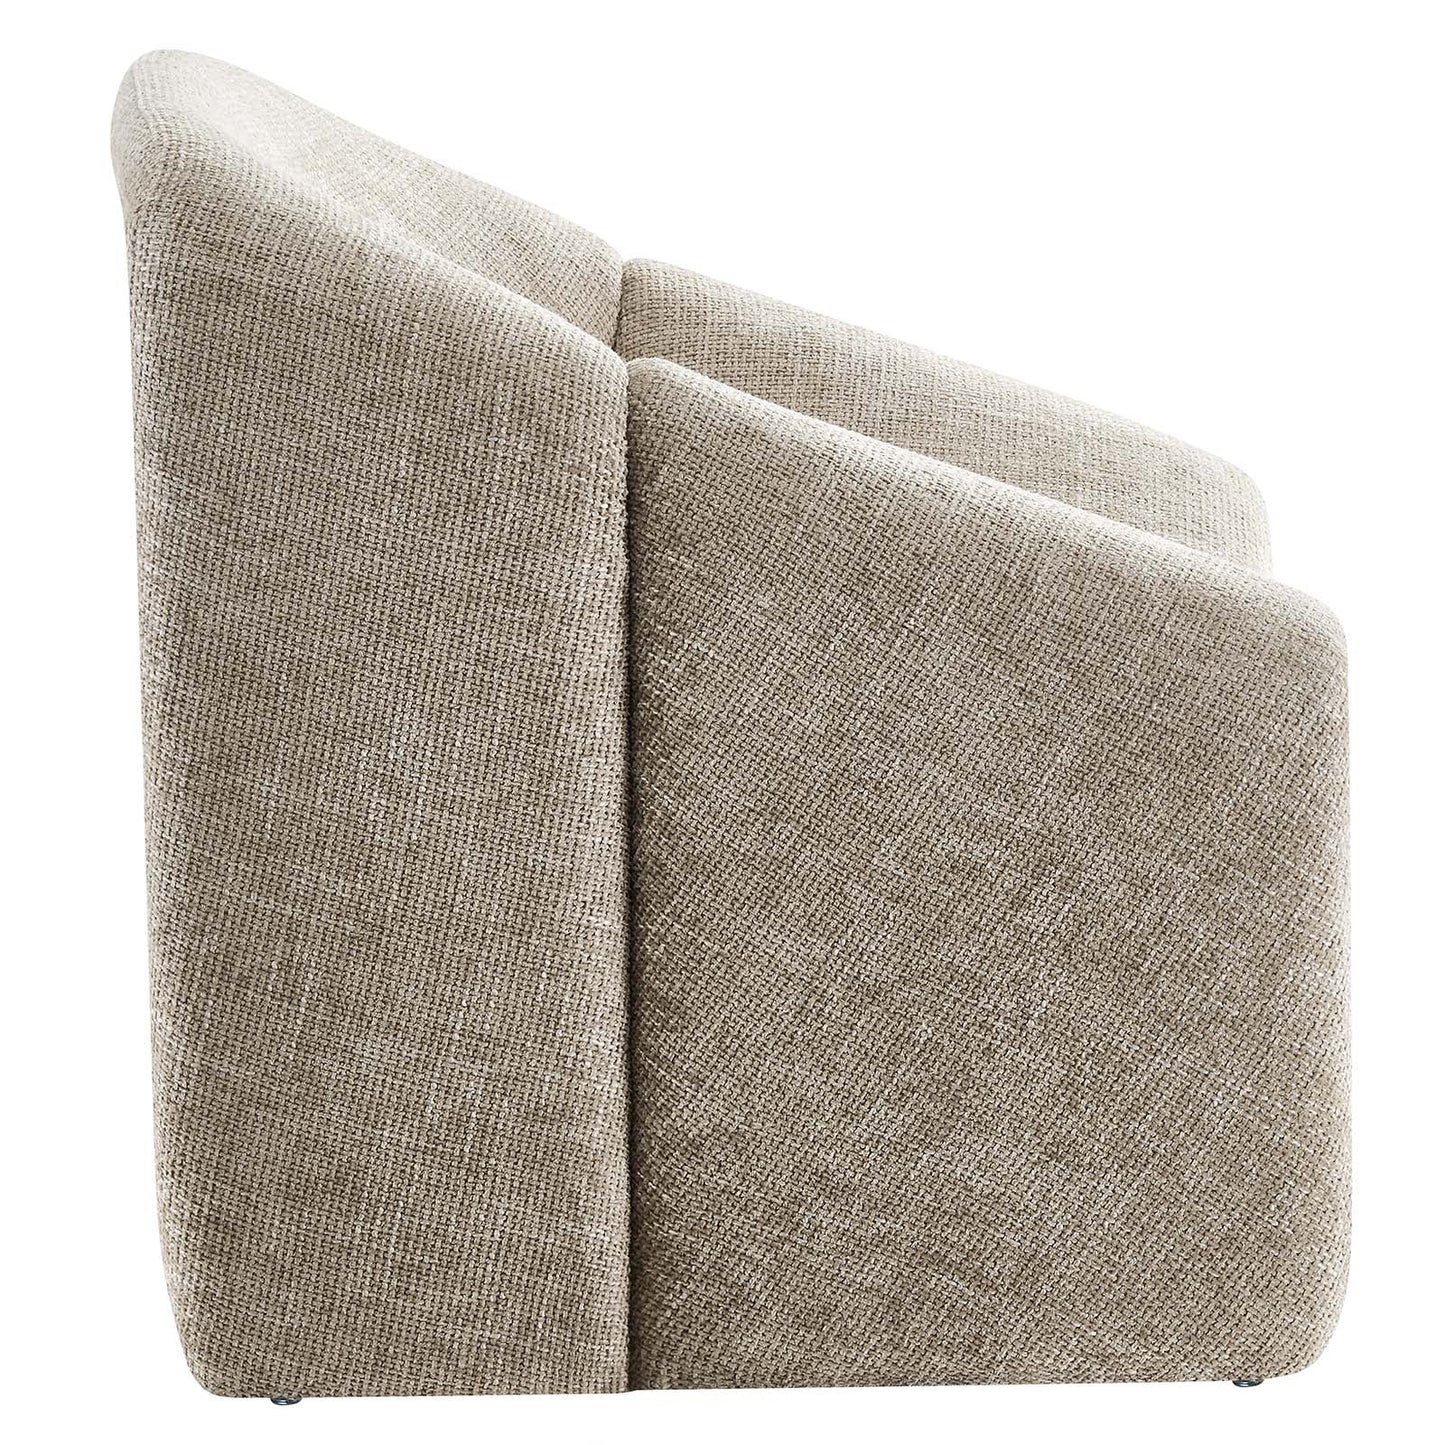 Dolly Chenille Upholstered Accent Chair